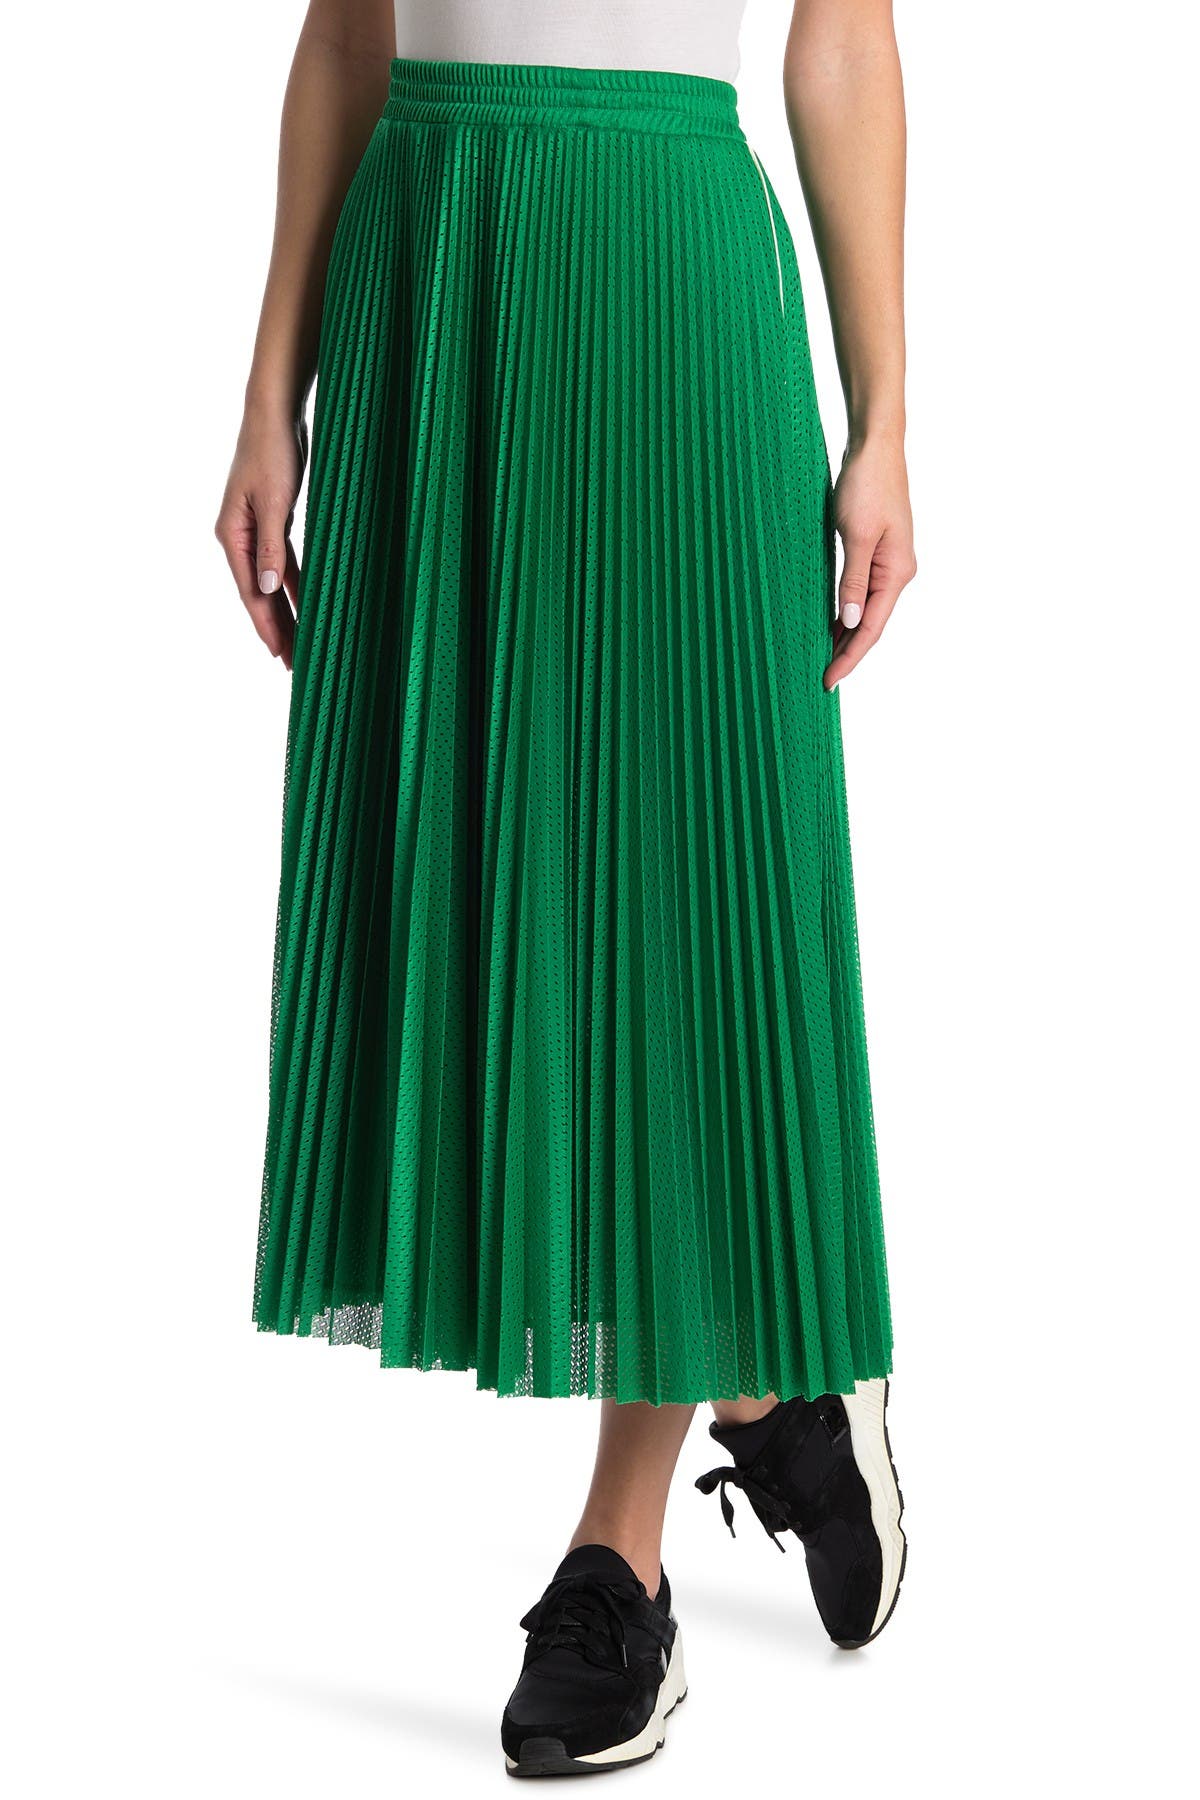 Red Valentino Perforated Pleated Skirt In Green